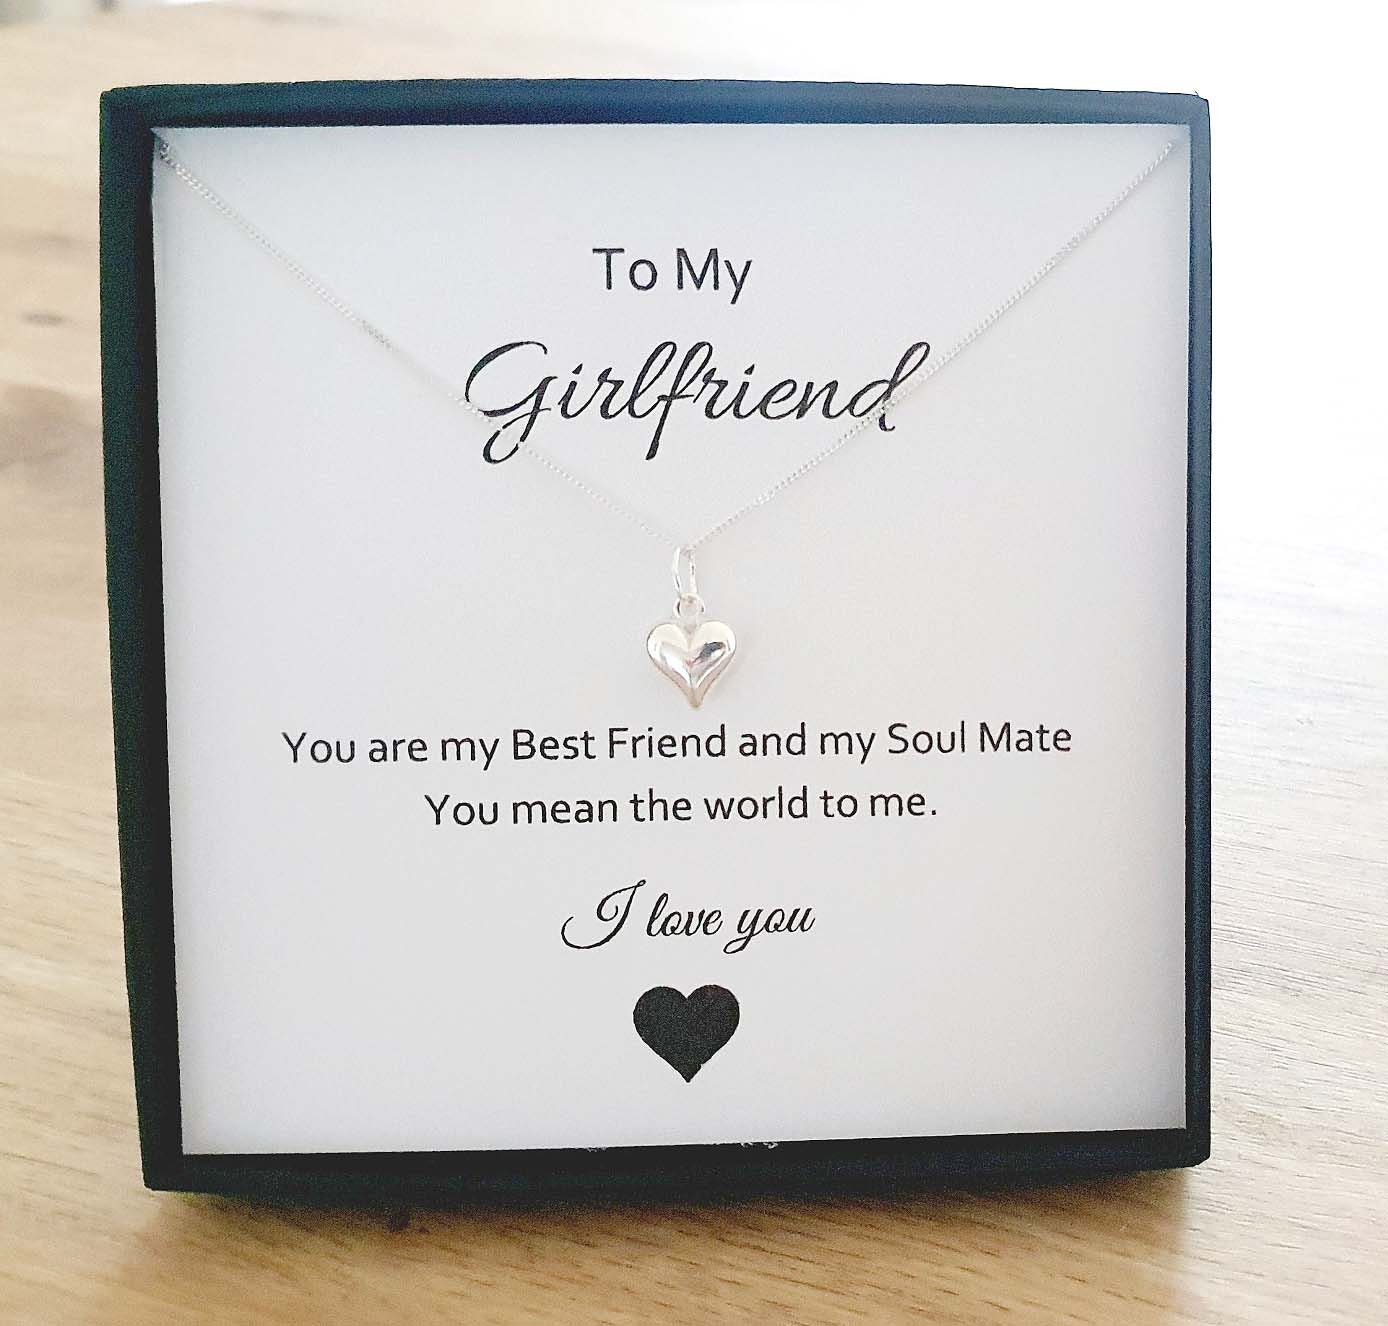 Girlfriend Gifts, Funny Candle for Girlfriend, Gift From Boyfriend, Girlfriend  Birthday Gifts for Women, Gag Gift Being My Girlfriend 